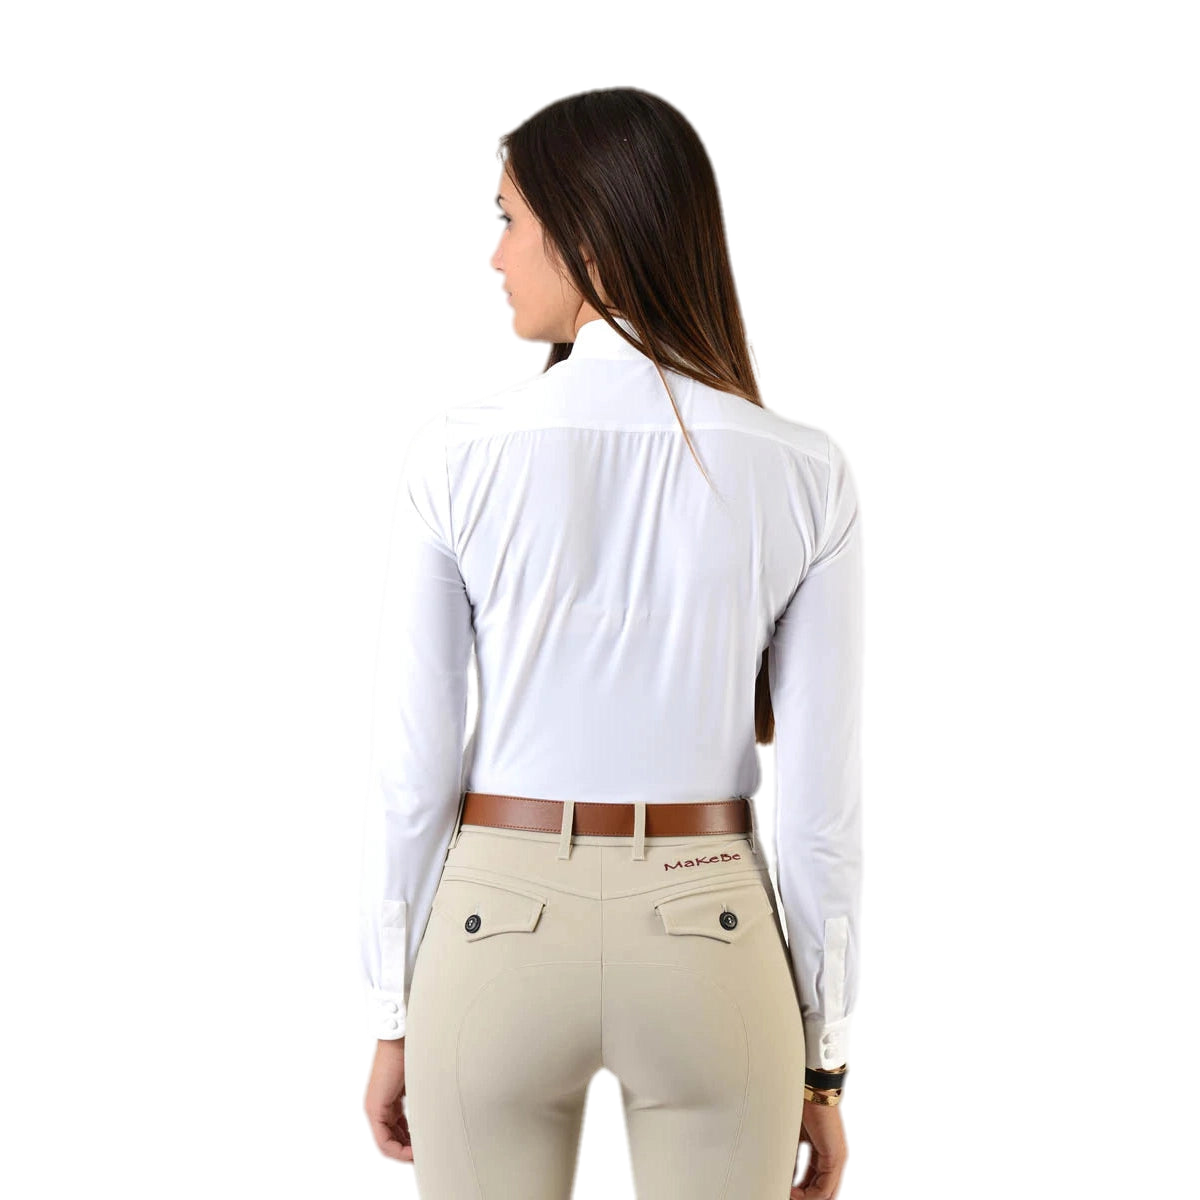 The Dafne Long Sleeve Shirt with Buttons